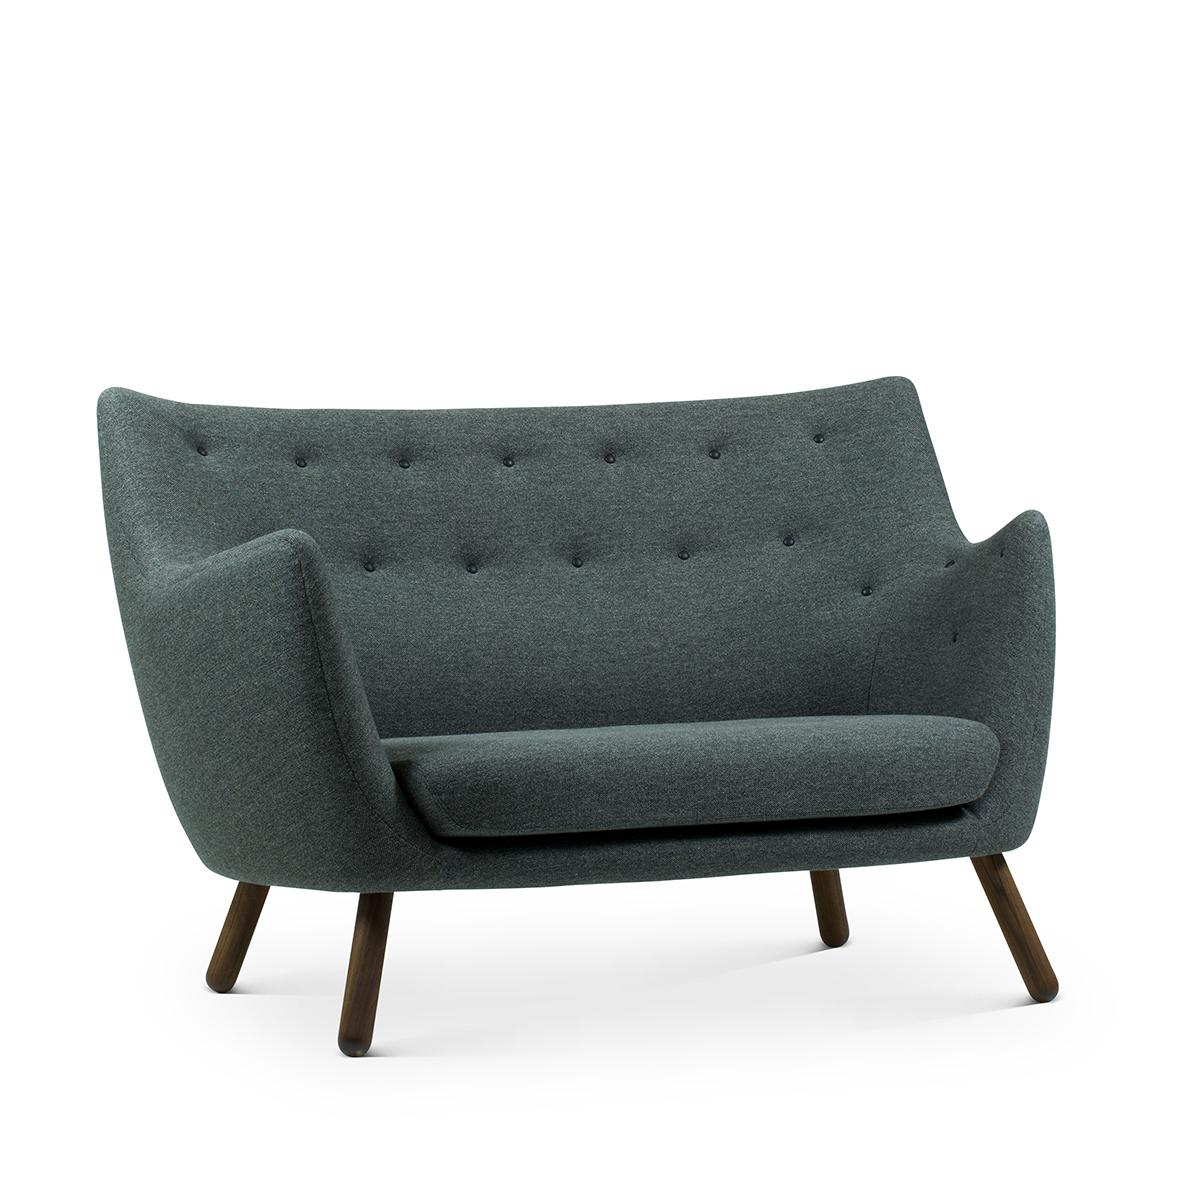 Sofa designed by Finn Juhl in 1946, relaunched in 2008.
Manufactured by House of Finn Juhl in Denmark.

This small two-seater sofa first saw the light of day at the Copenhagen Cabinetmakers’ Guild Exhibition in 1941. It should be seen as a